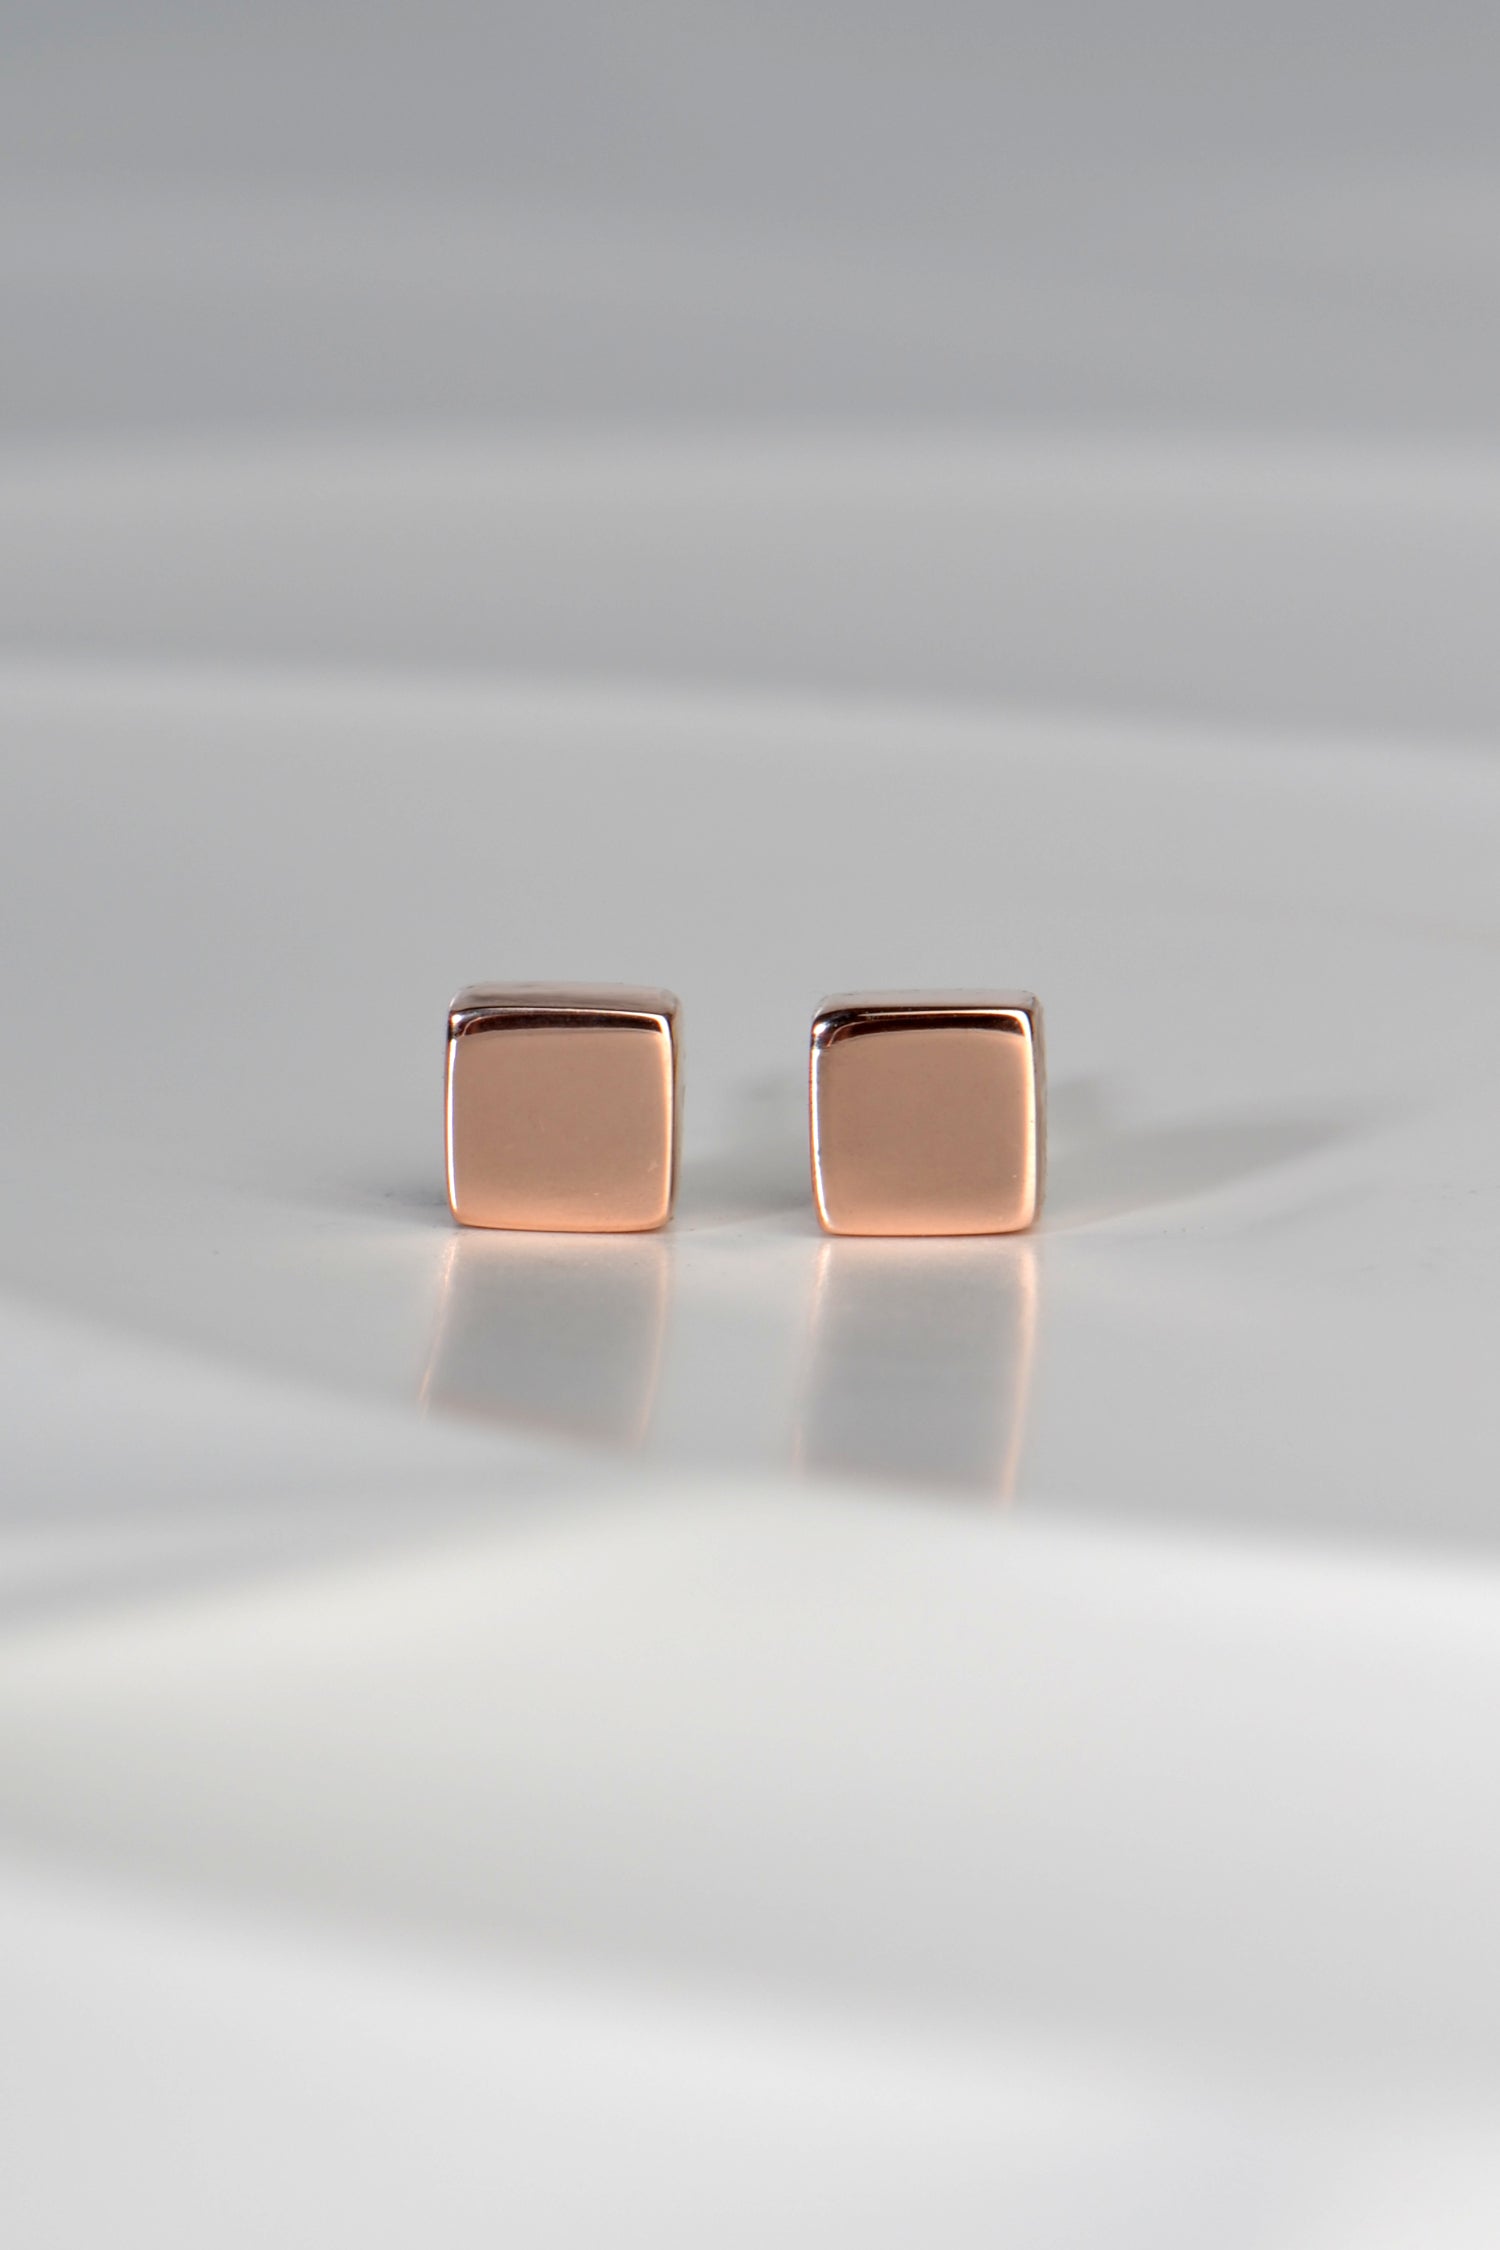 designer earrings made of polished small square blocks of gold